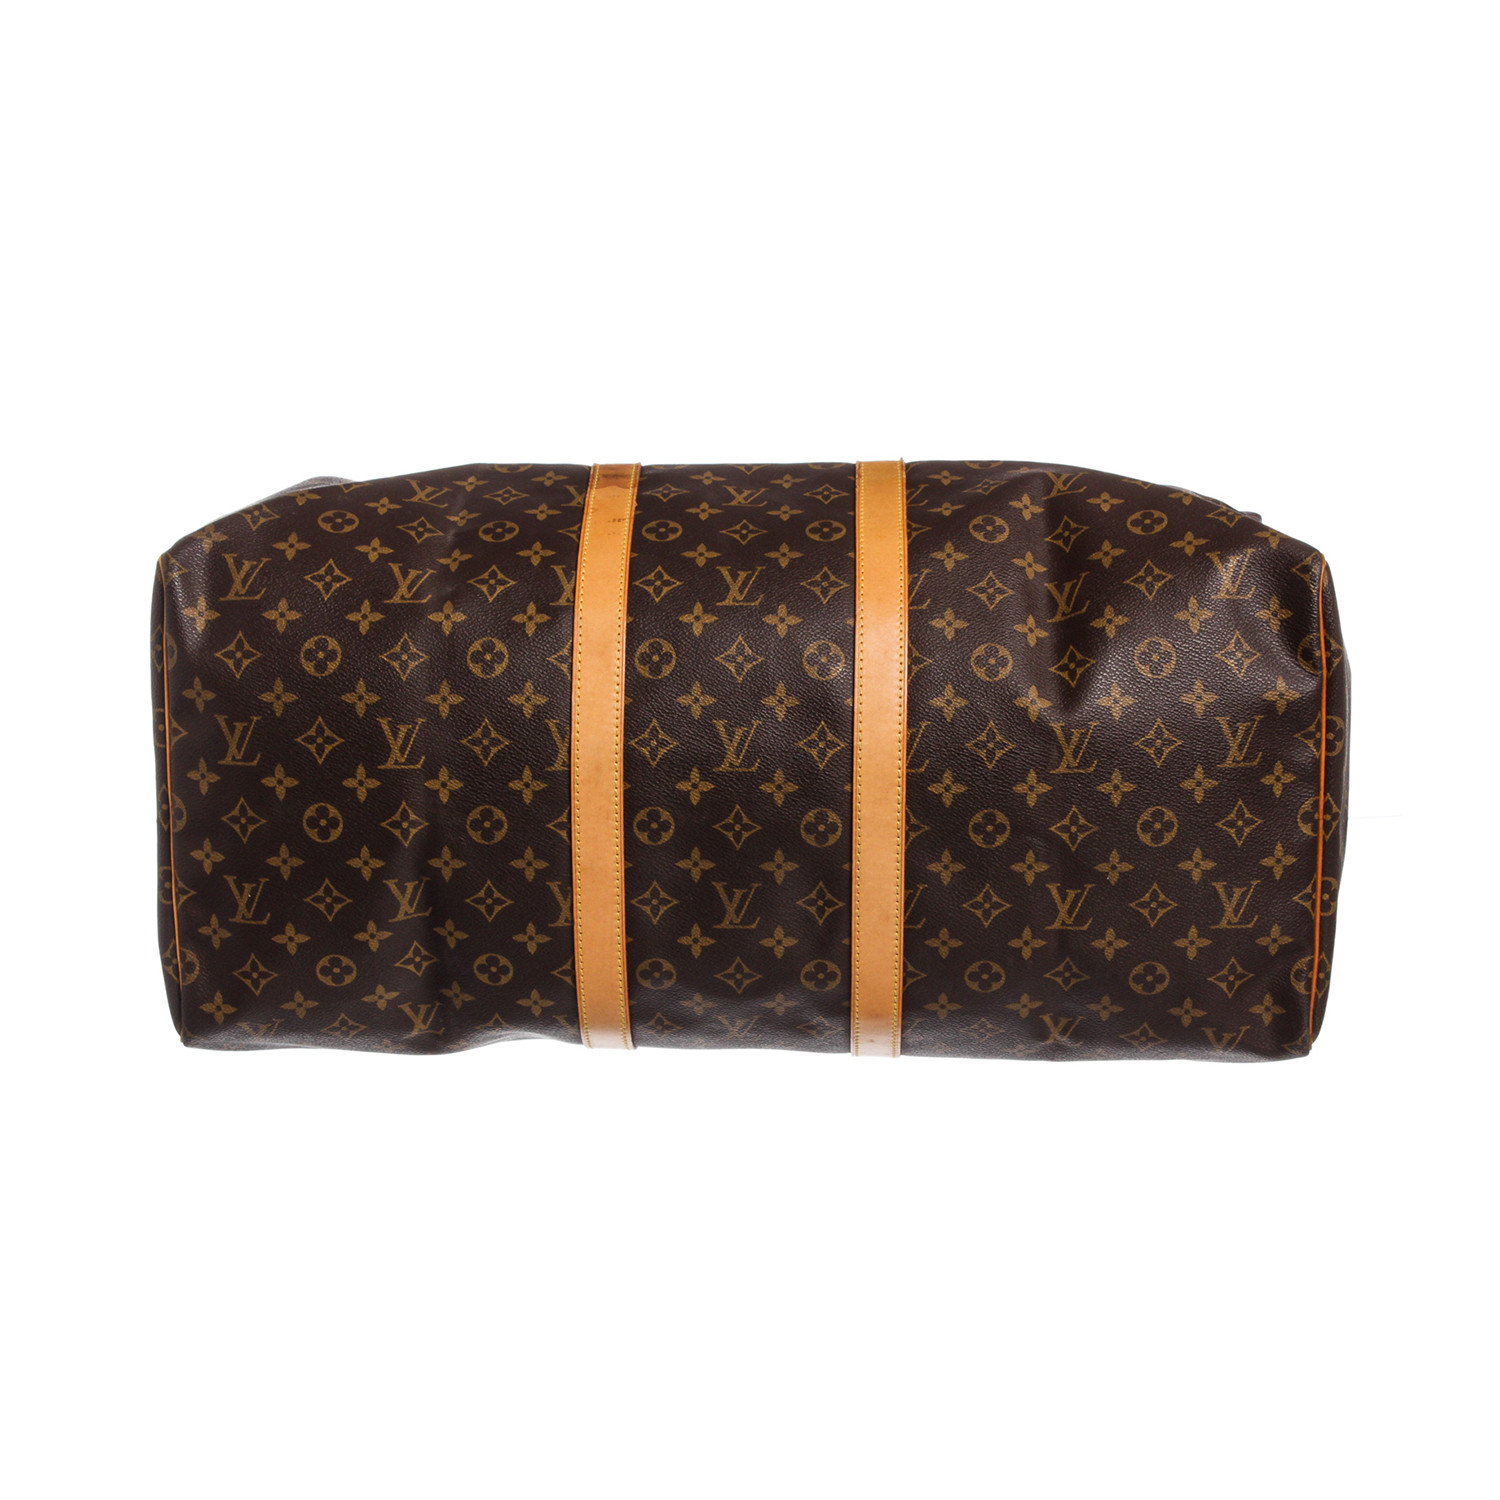 Louis Vuitton // Monogram Canvas Leather Keepall 55 cm Duffle Bag Luggage // SP1926 // Pre-Owned ...